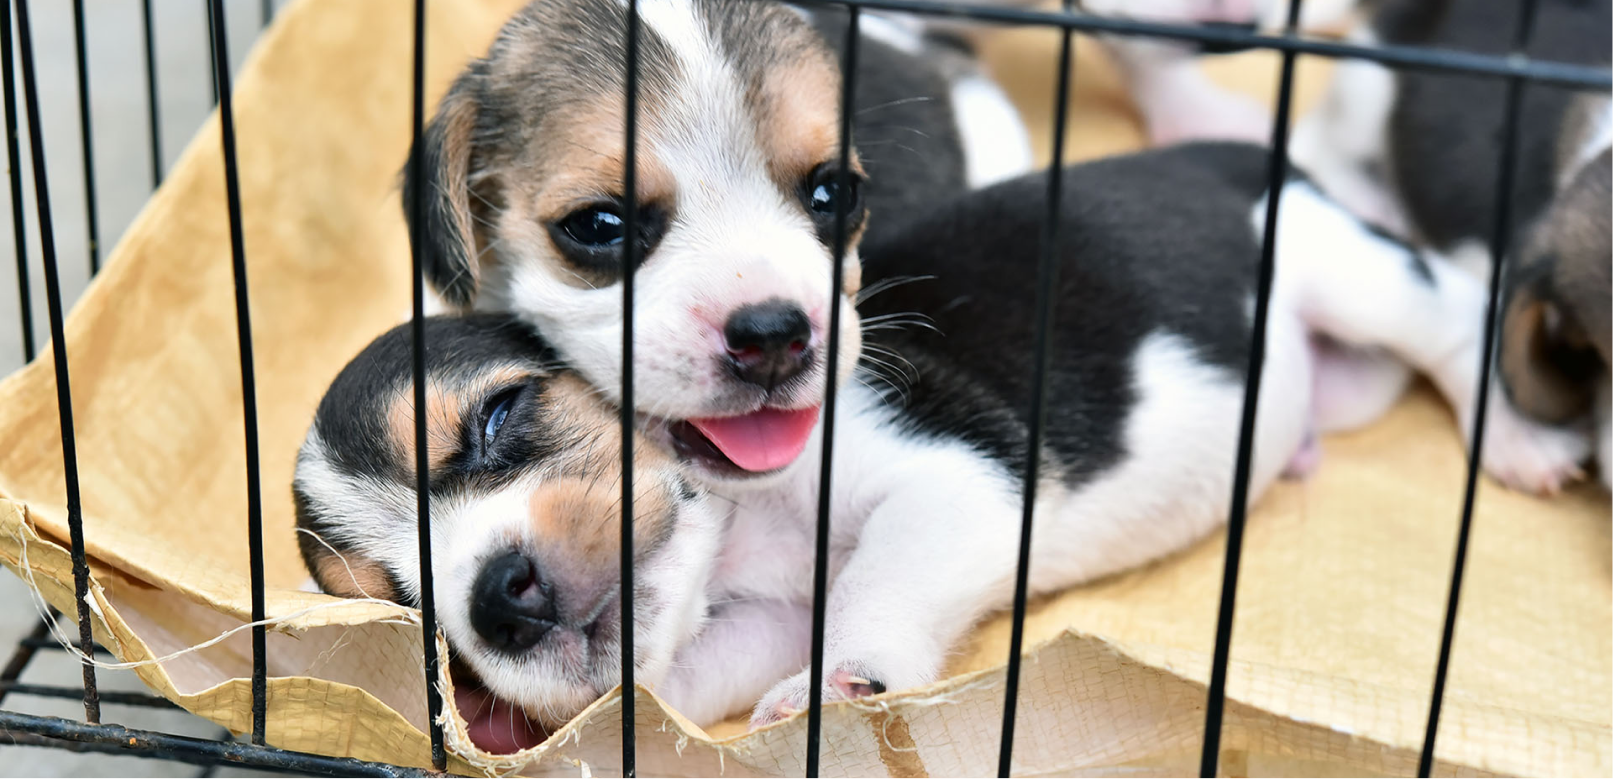 Buying Puppies on Craigslist? Don't Make This Mistake